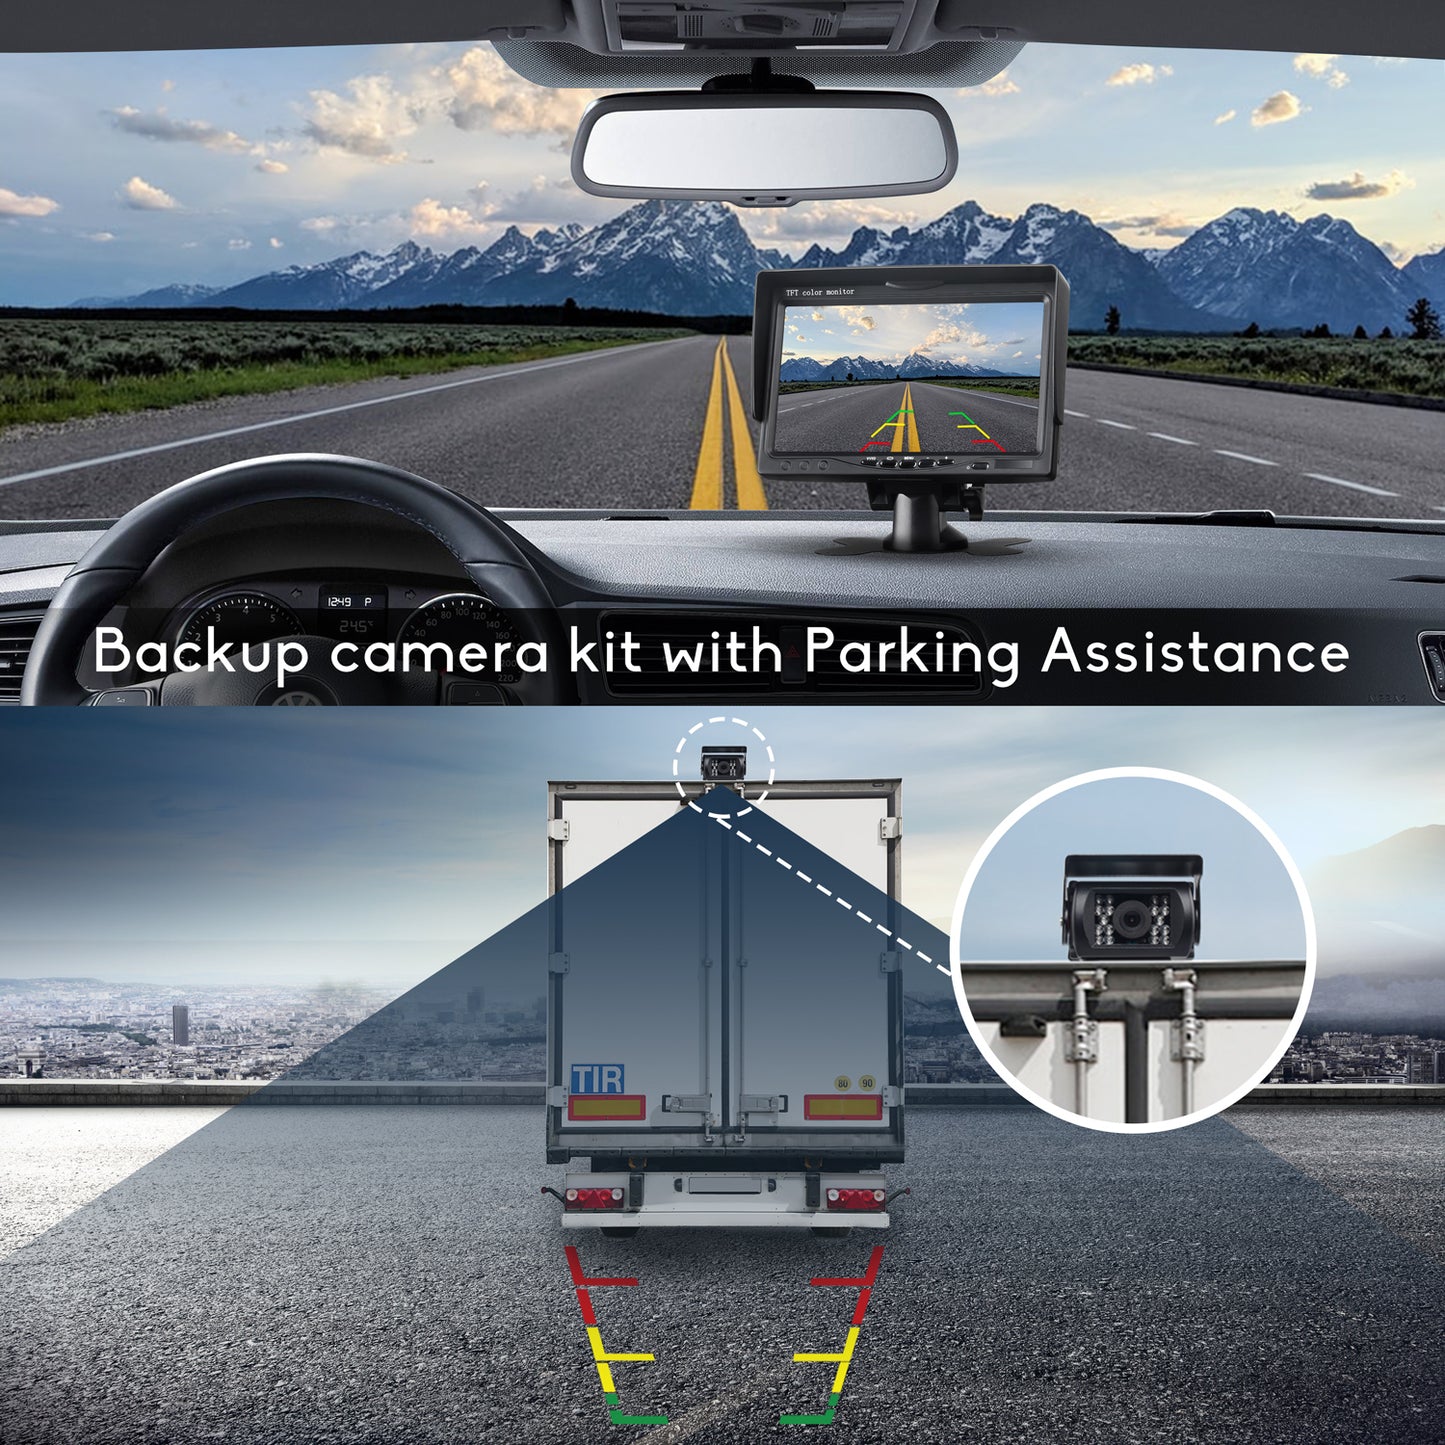 Toguard CA711 Backup Camera Kit, 7’’ LCD Rear View Monitor with IP67 Waterproof Night Vision Back up Rearview Reverse Cam